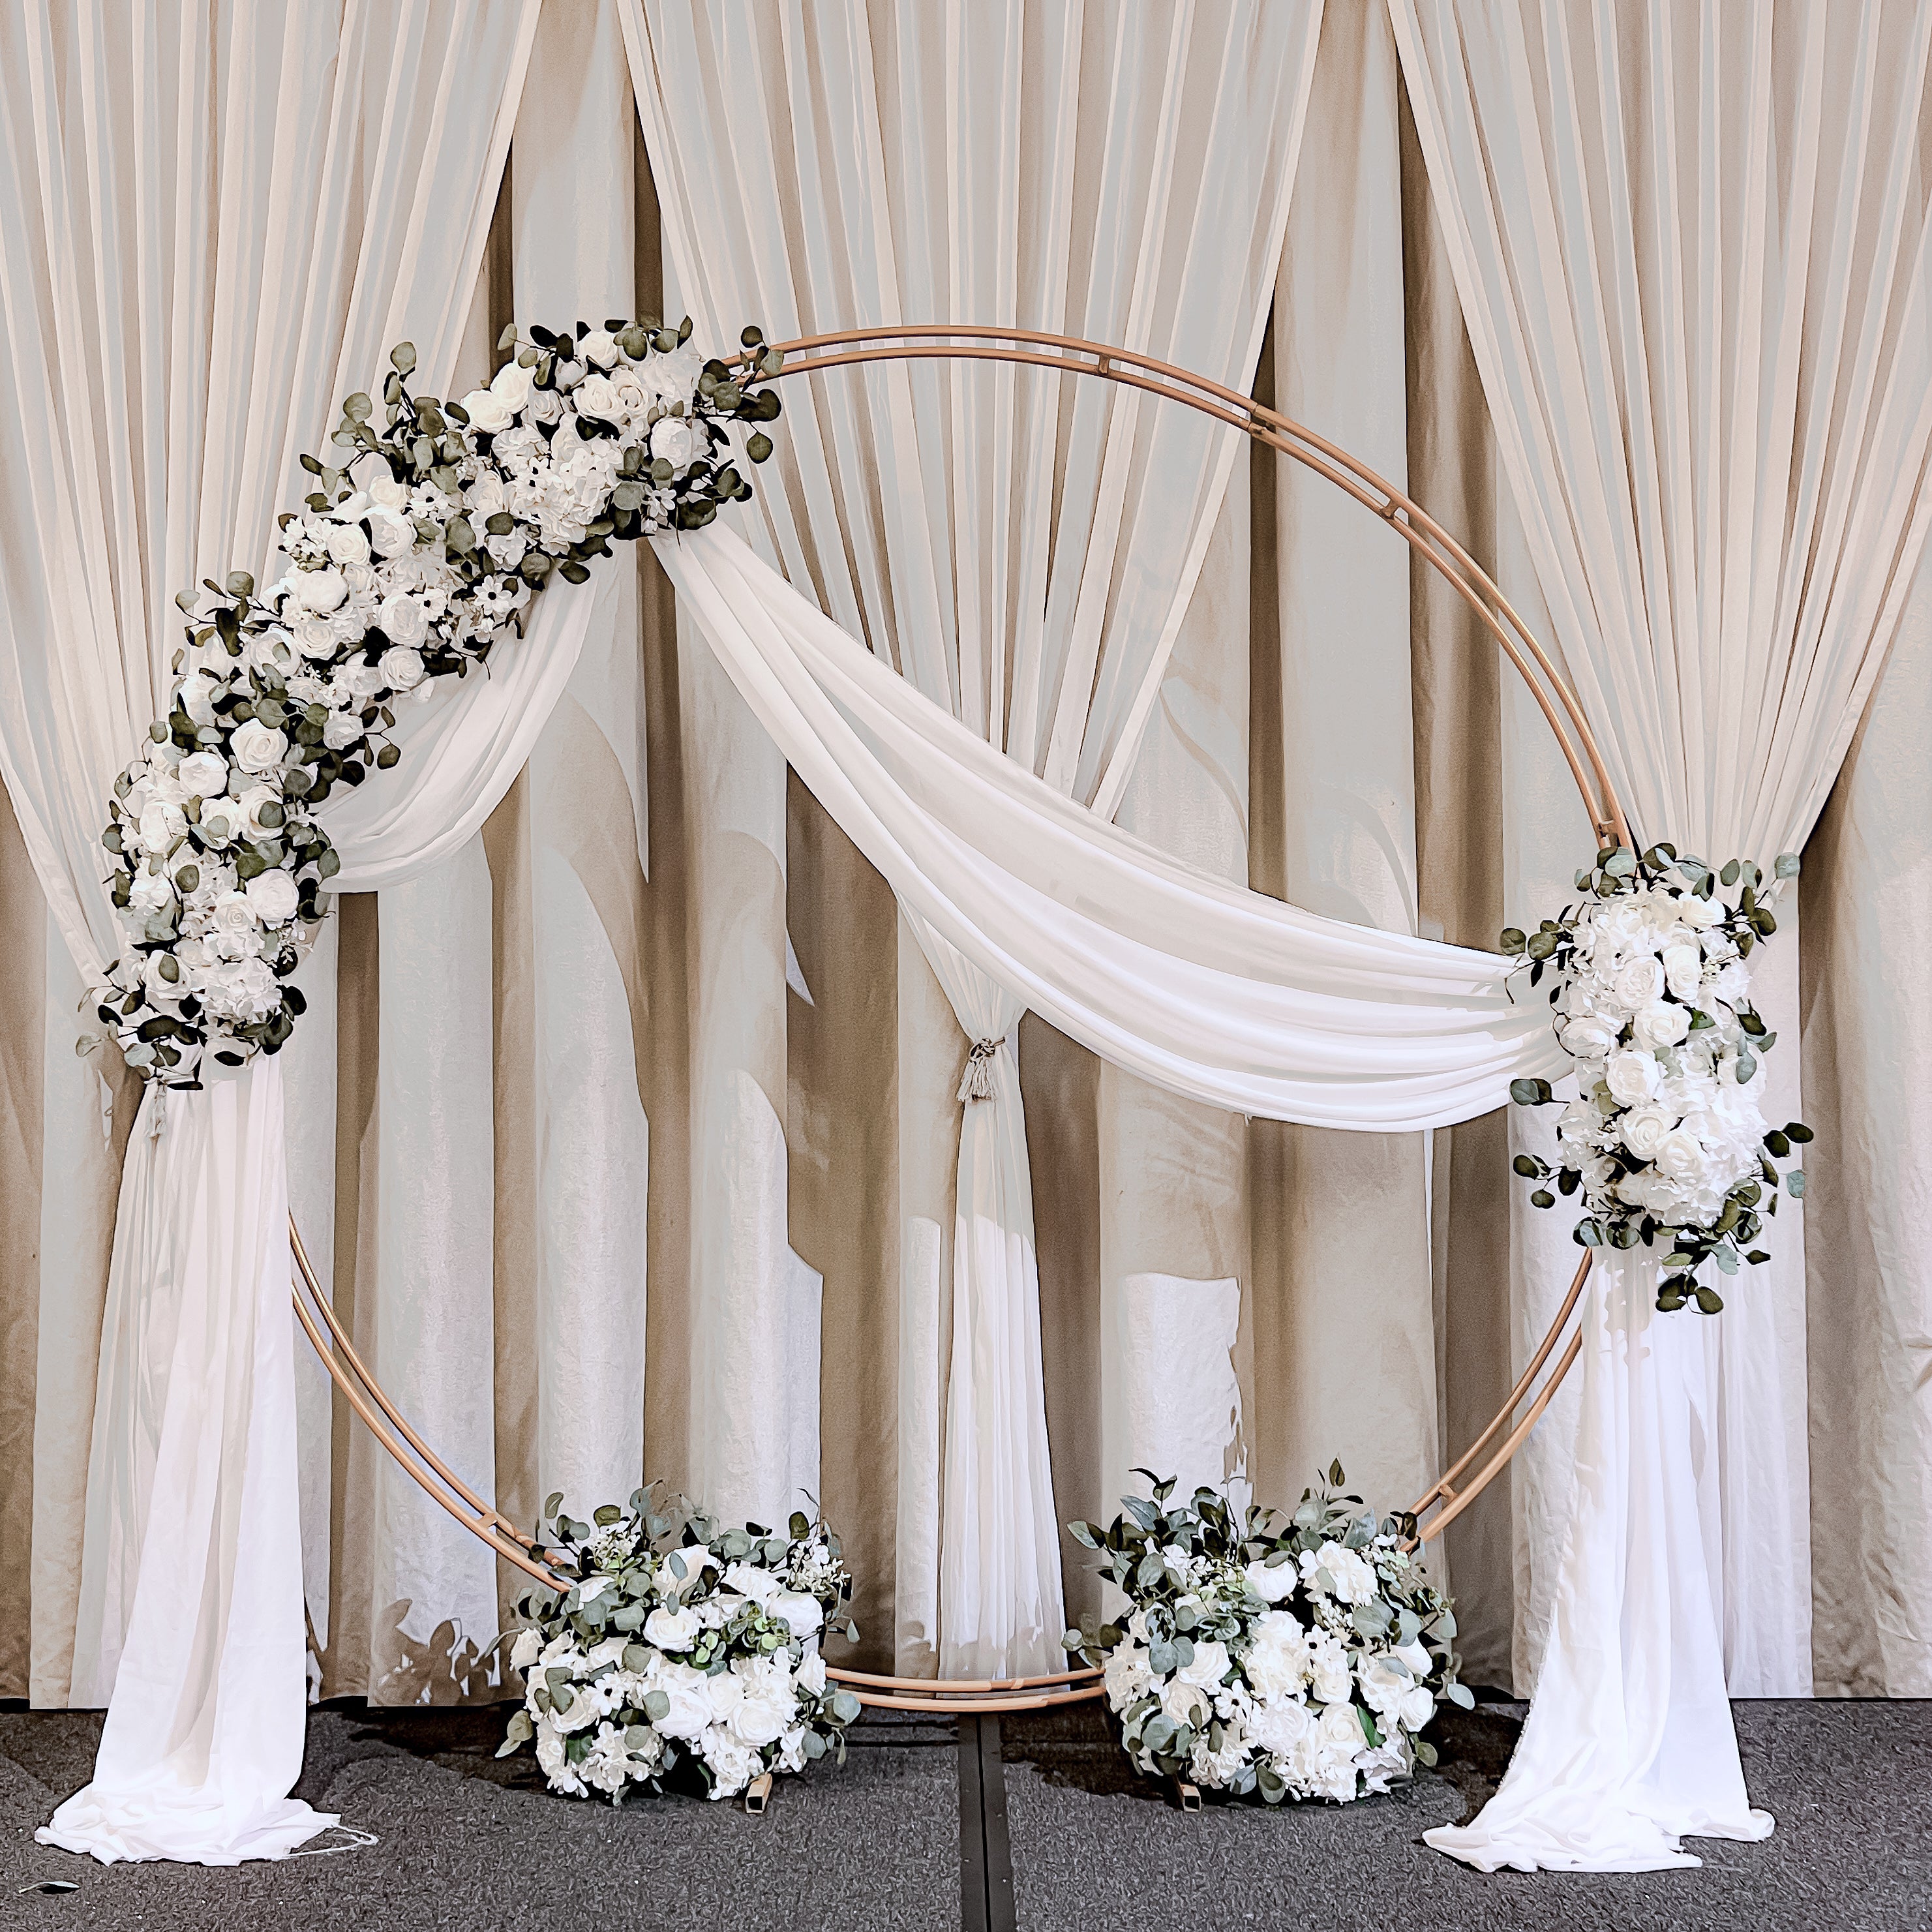 Wedding Stage Decor in Singapore - White Theme Floral Arch suitable for Indoor/Outdoor (Venue: Four Season Hotel Singapore )